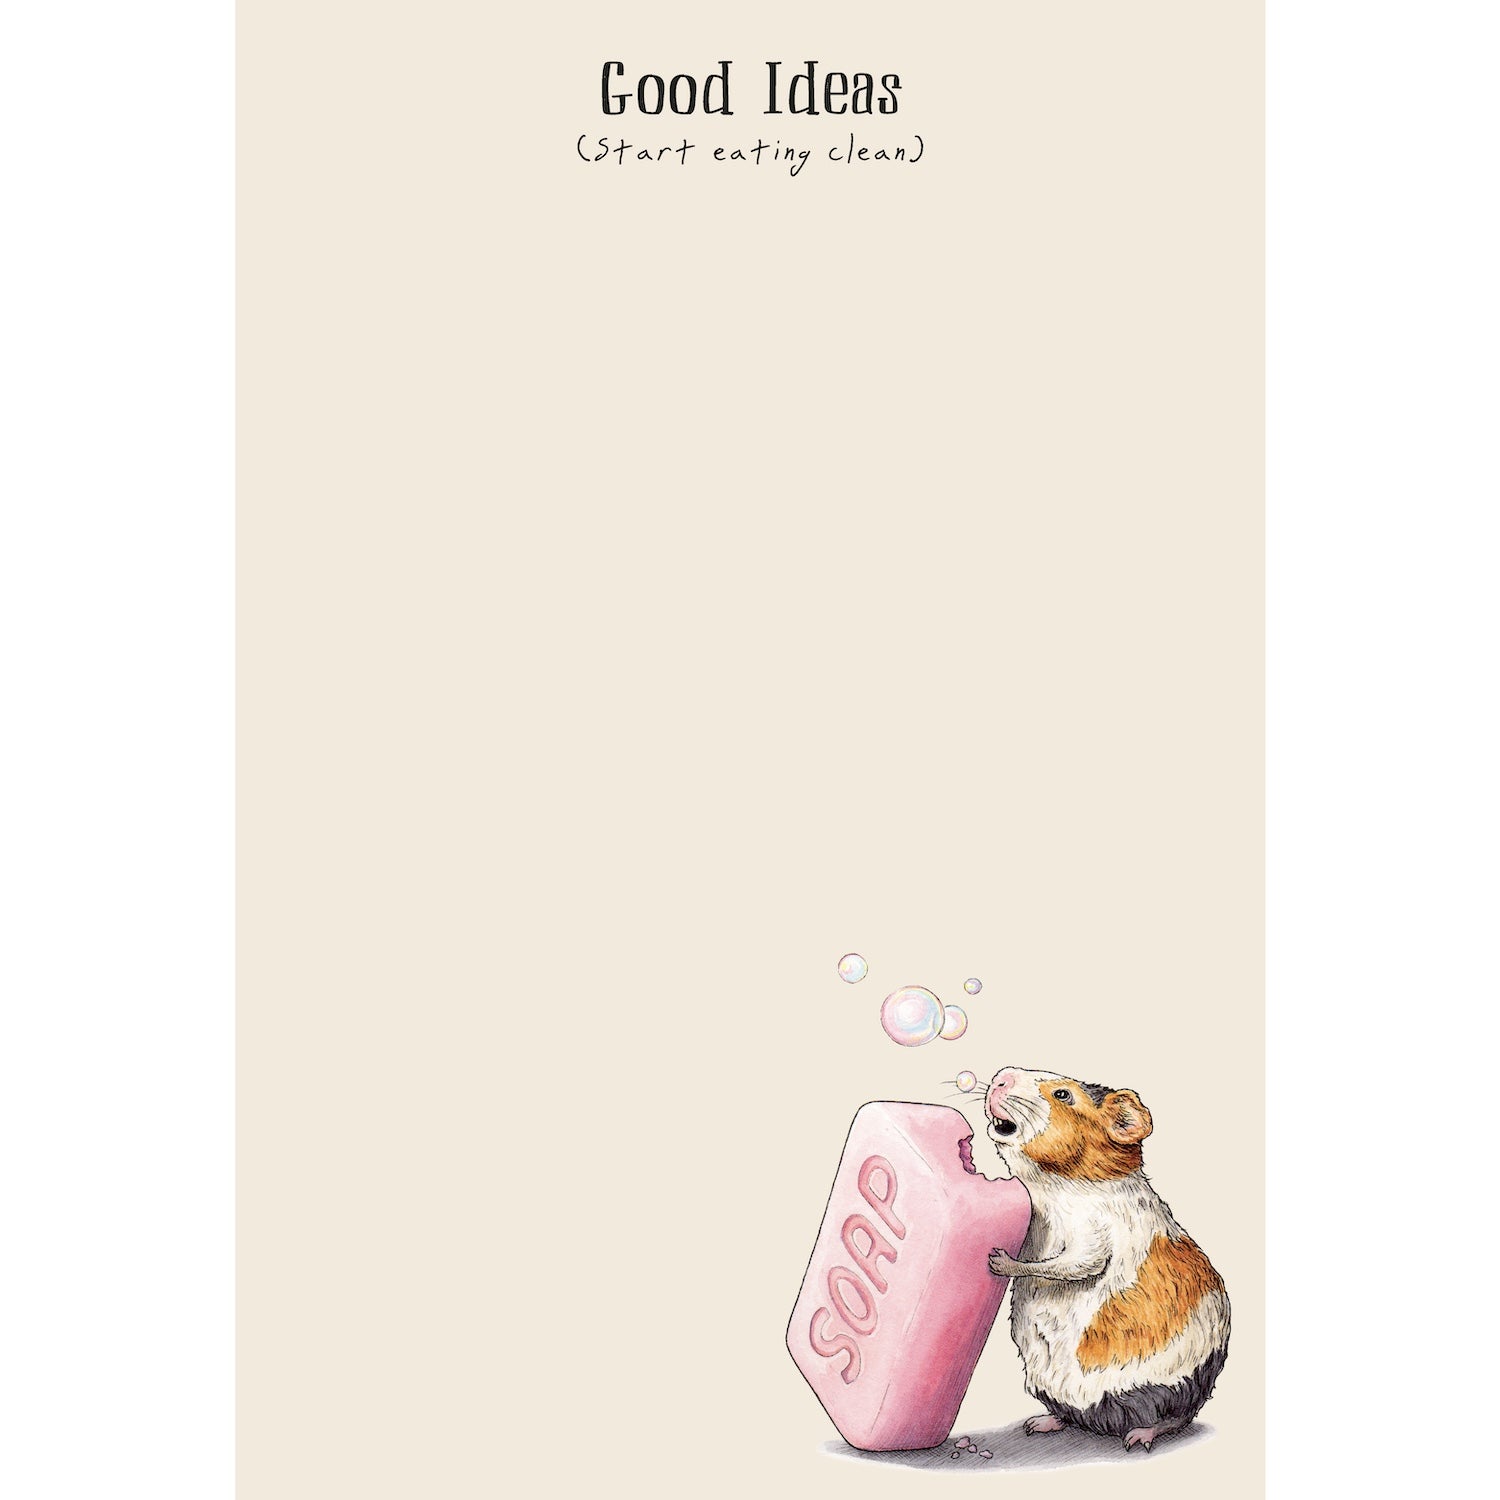 A cream notepad featuring a funny illustration of a guinea pig eating a bar of pink soap in the lower right, captioned &quot;Good Ideas (Start eating clean)&quot; at the top.